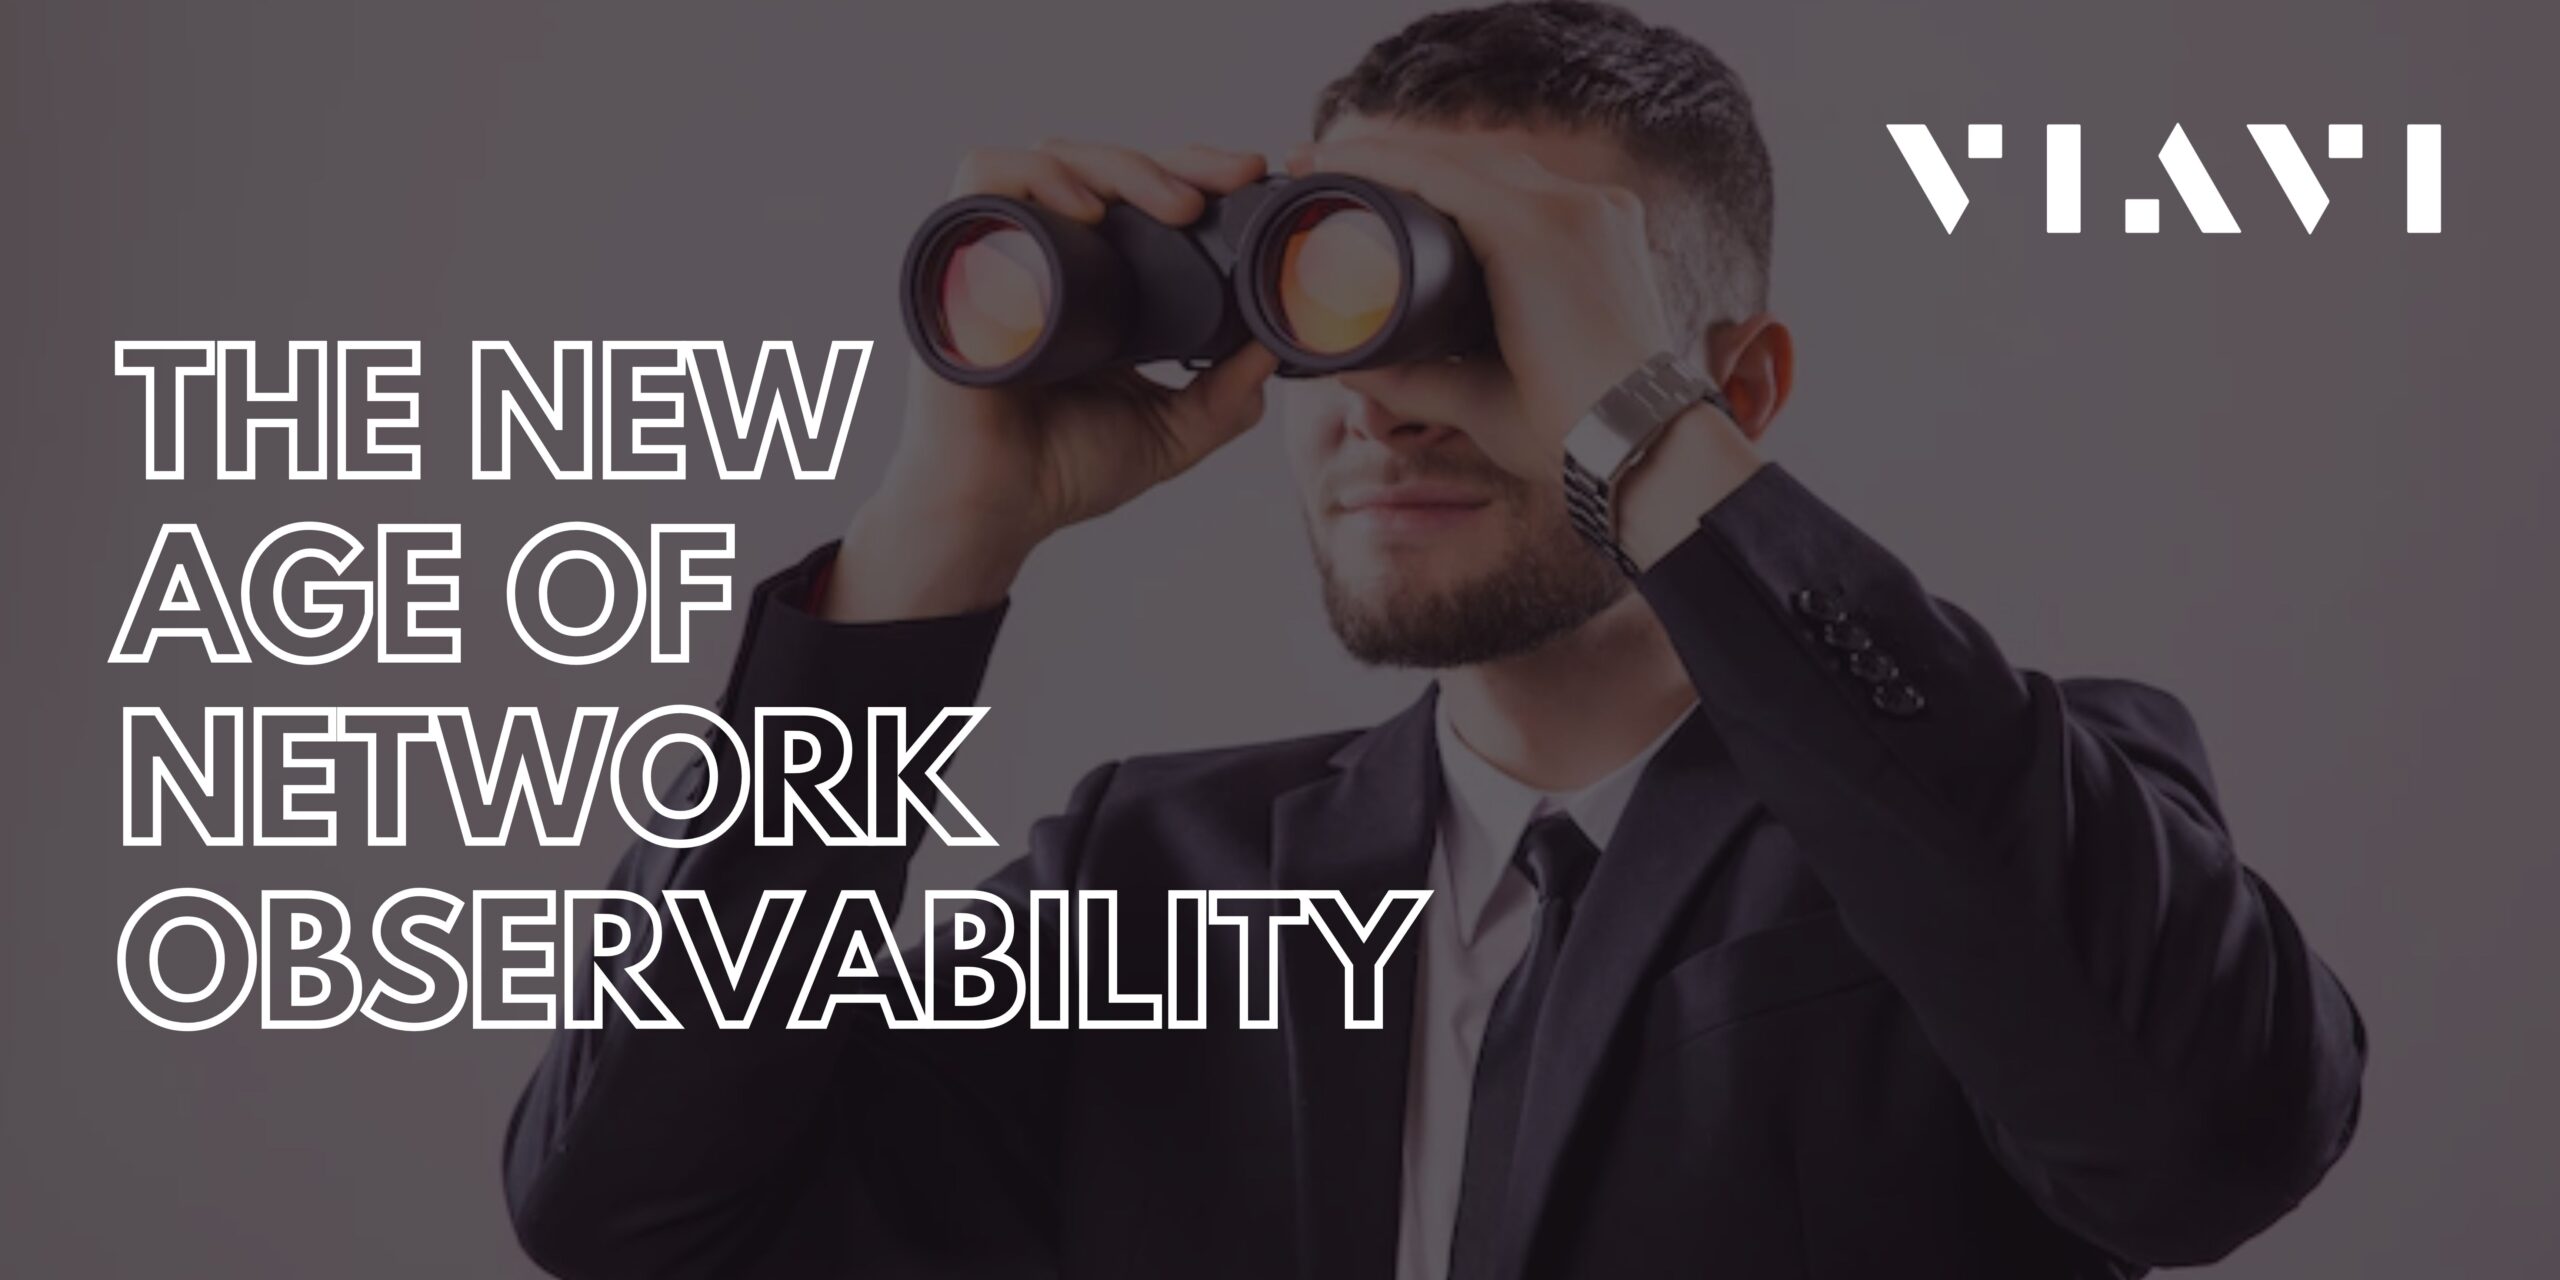 The New Age of Network Observability